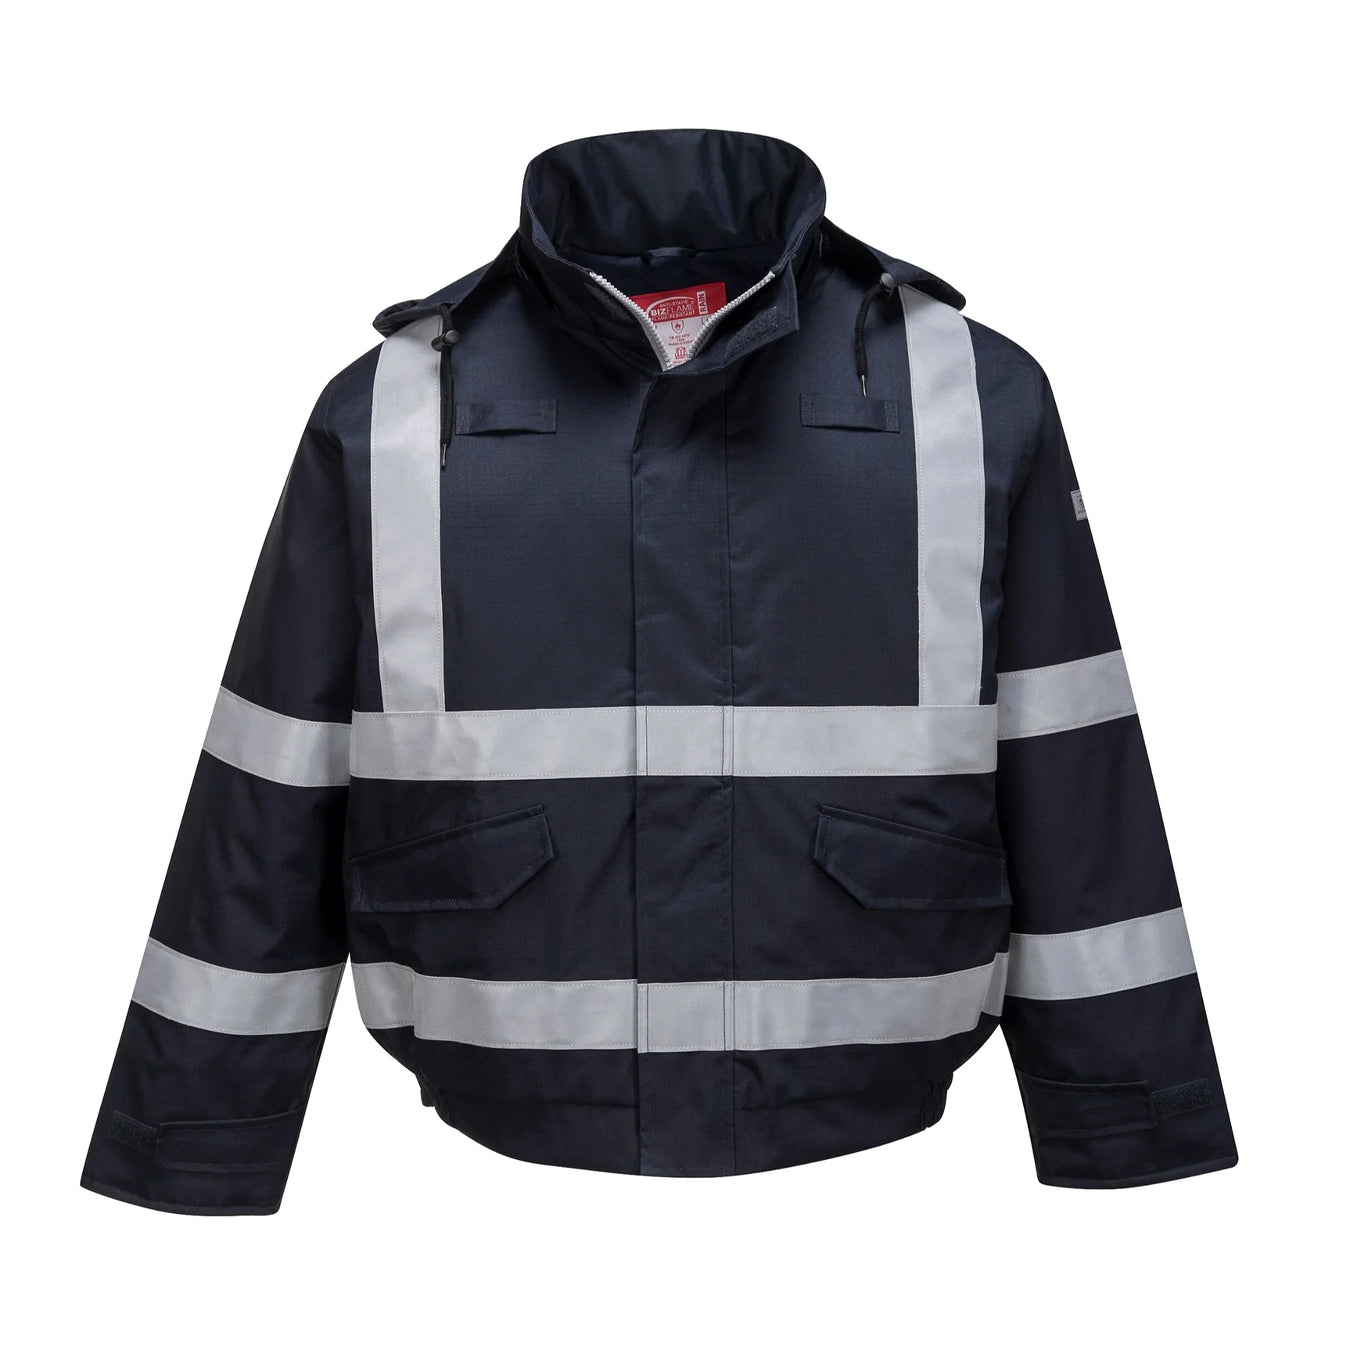 Flame Resistant Jackets